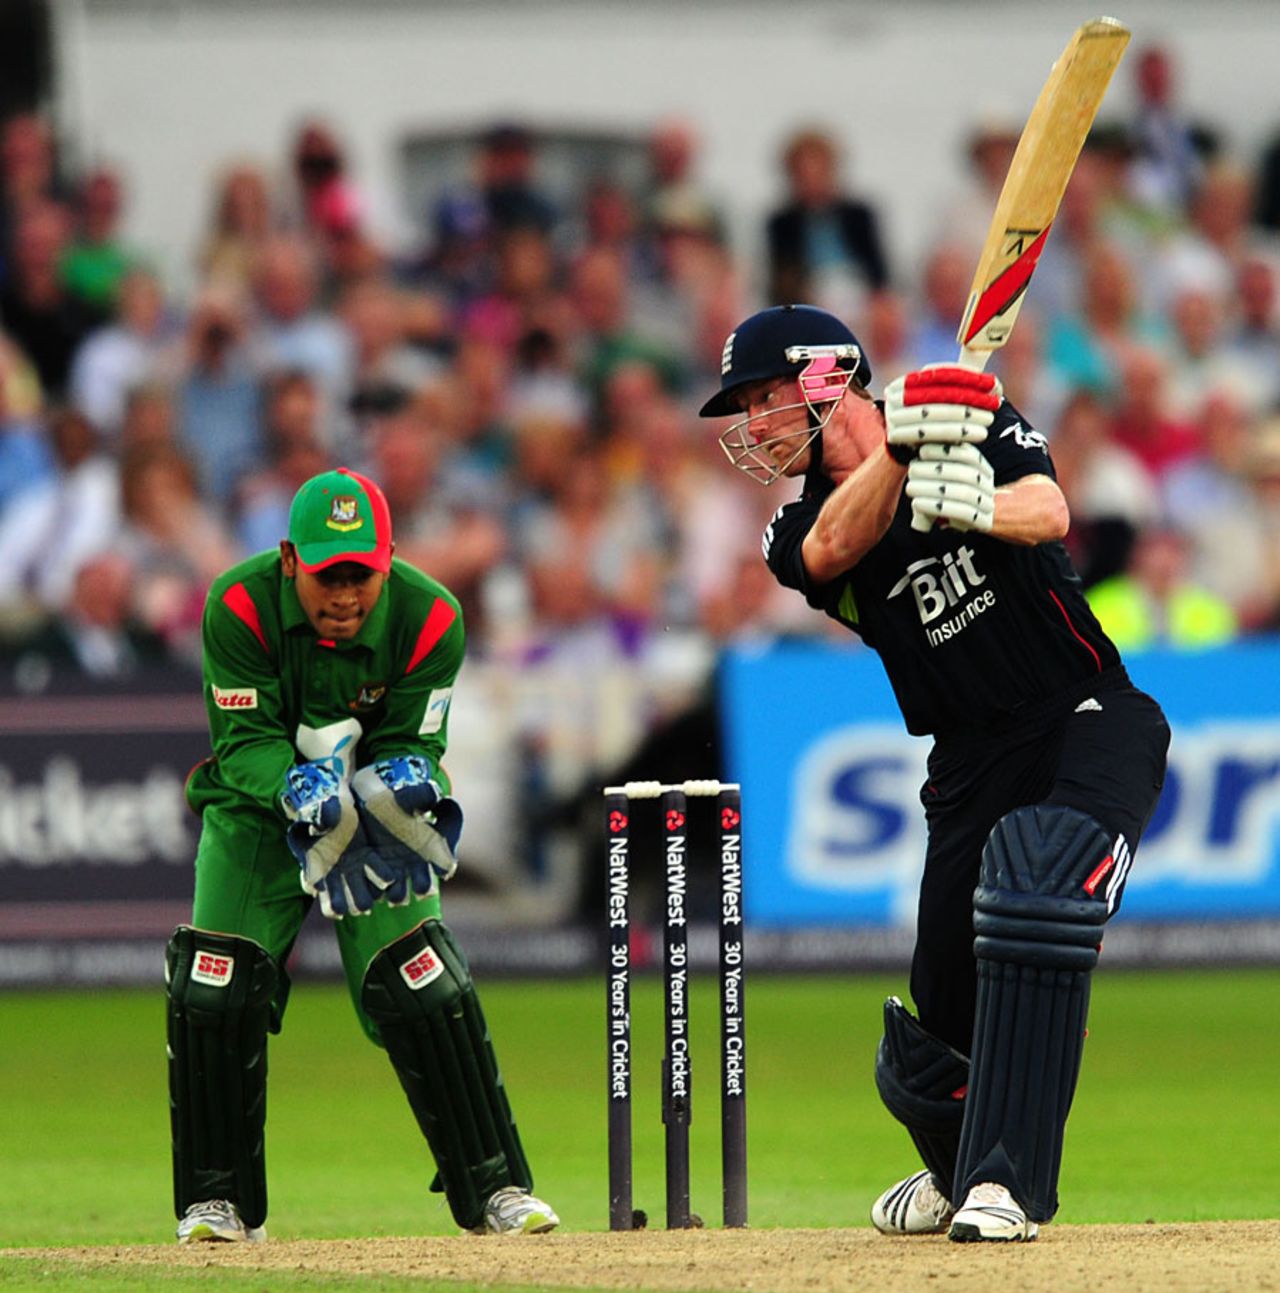 Paul Collingwood steadied England after the loss of the openers, England v Bangldesh, 1st ODI, Trent Bridge, July 8, 2010